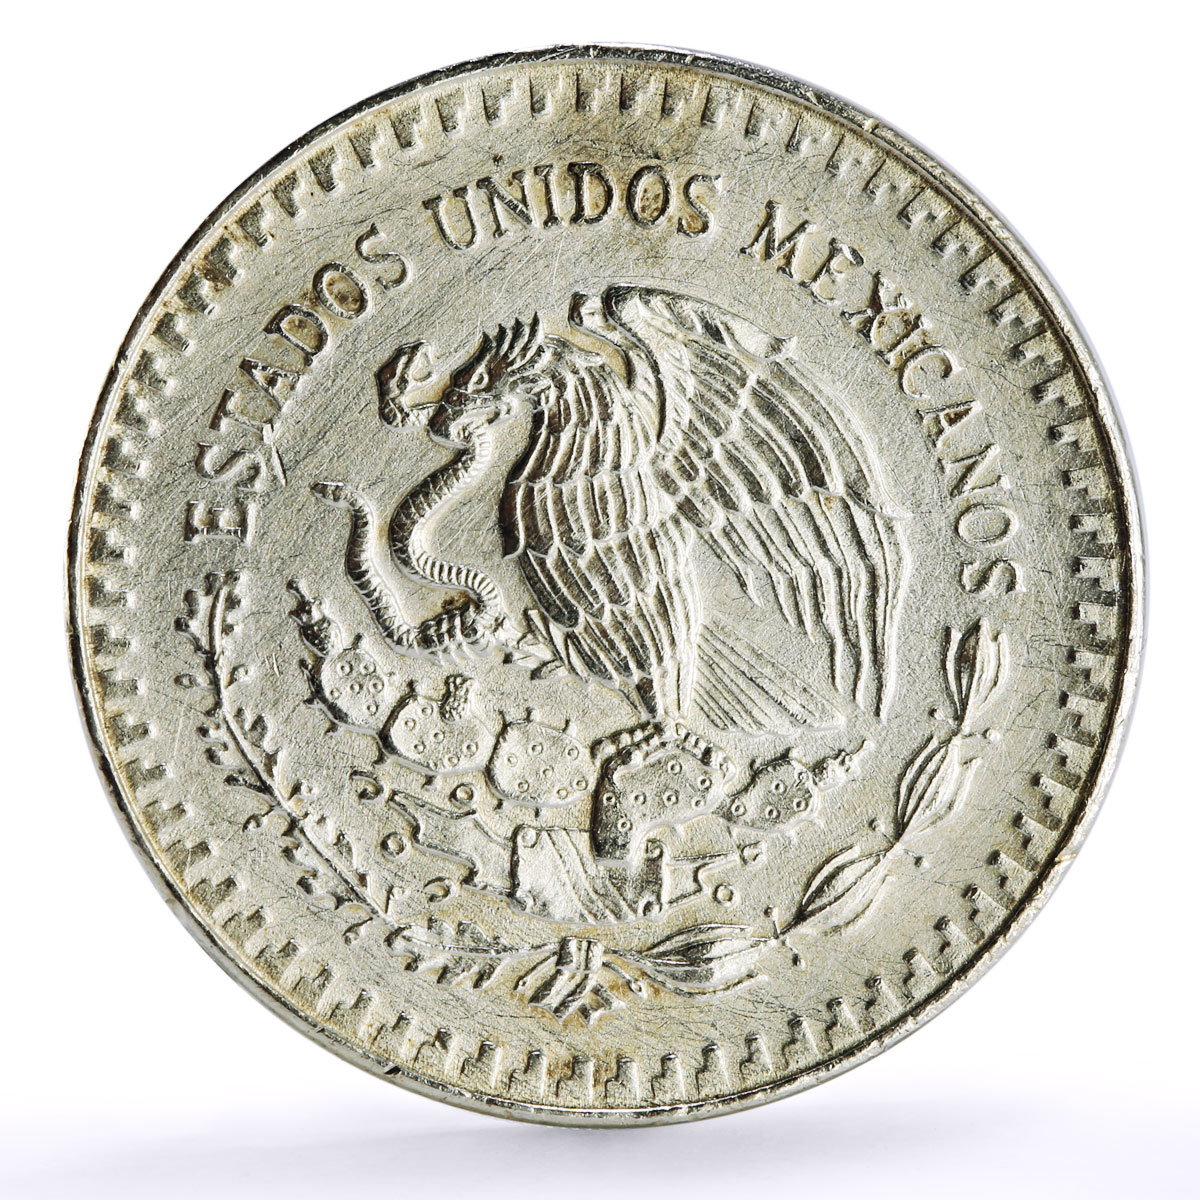 Mexico 1 onza Libertad Angel of Independence silver coin 1988